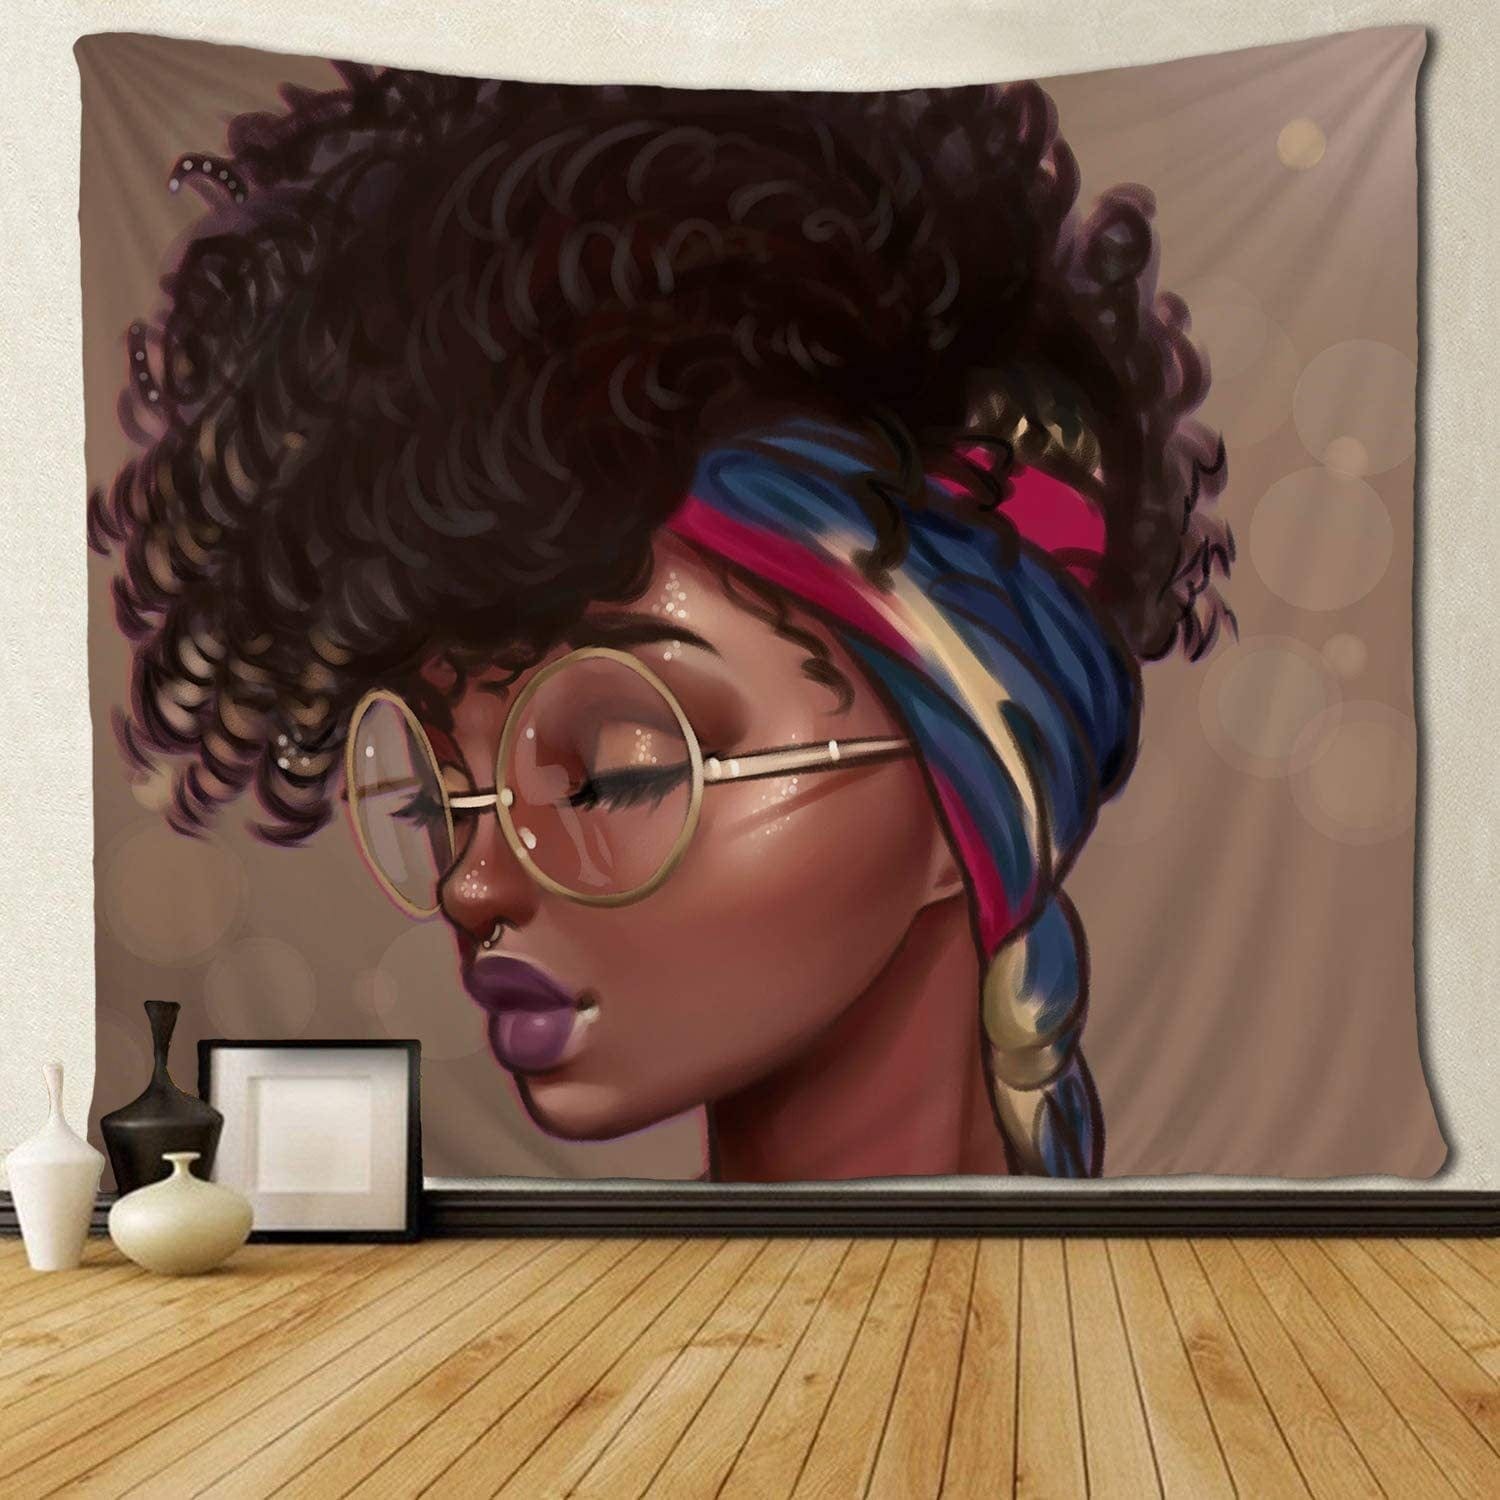 Tapestry Home Bohemian Tapestry Room Decoration African Women Cloth Decorative Cloth Tapestry - CLASSY CLOSET BOUTIQUETapestry Home Bohemian Tapestry Room Decoration African Women Cloth Decorative Cloth Tapestryeperlo2E533849802A49B89738C8C2487F0AA46148*200